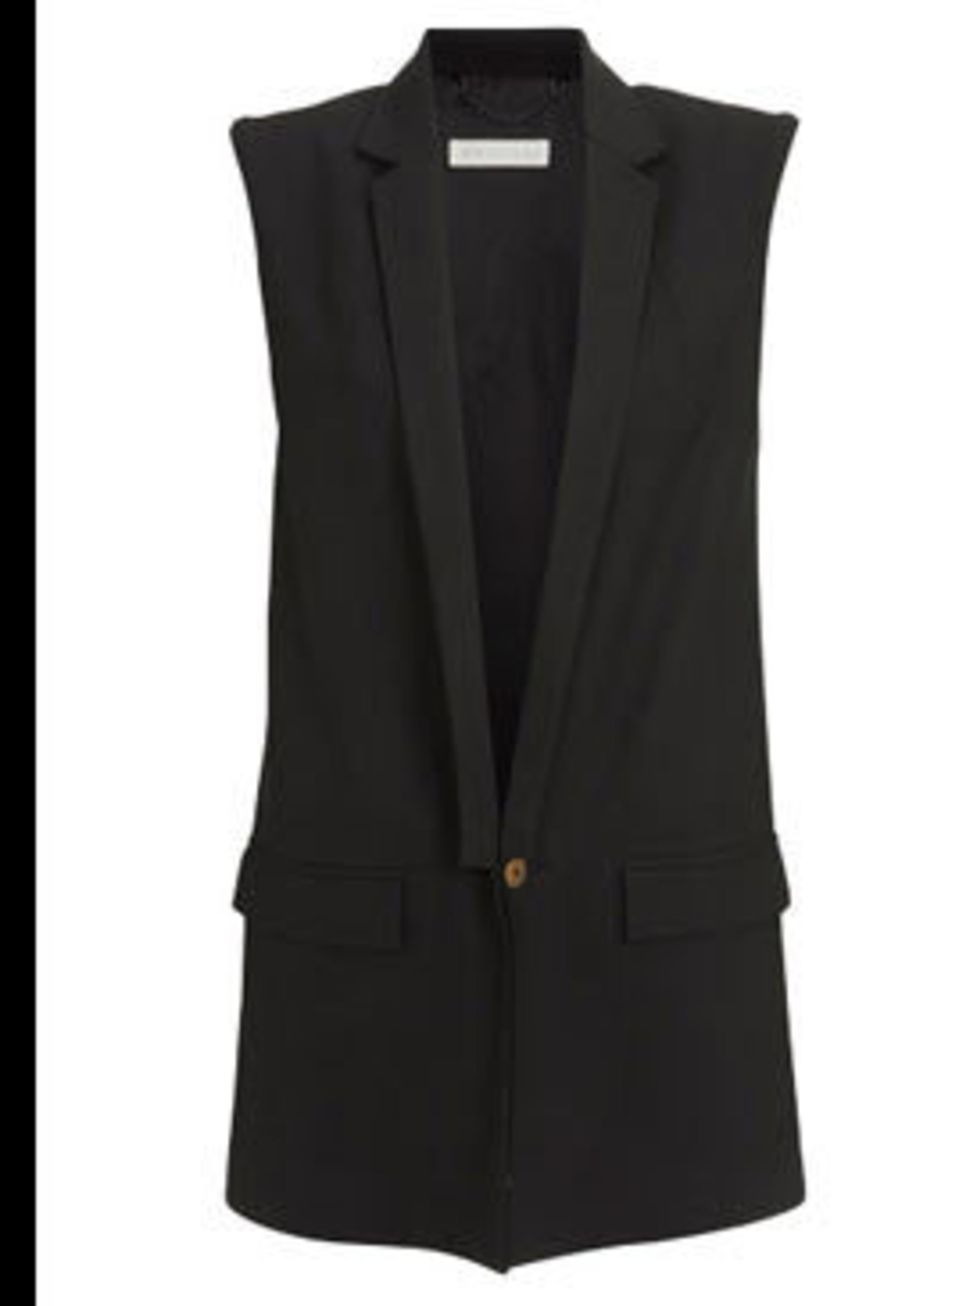 <p>Sleeveless Blazer, £130 by <a href="http://www.whistles.co.uk/fcp/product/whistles/newin/Sleeveless-Blazer/903000053723">Whistles</a></p>